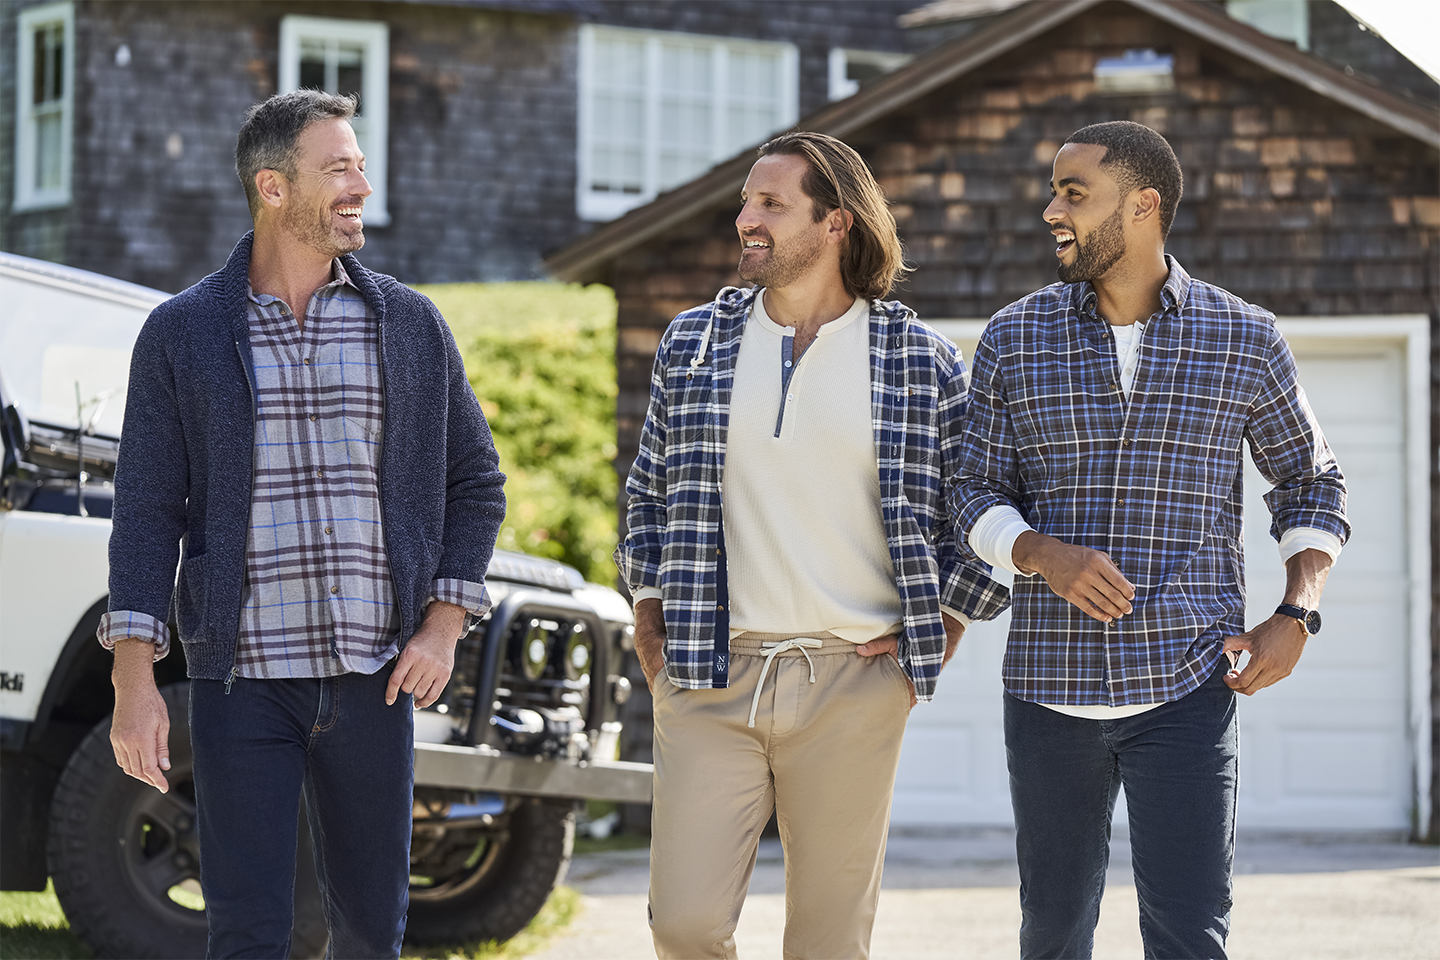 Nantucket Whaler Launches Fall/Winter 2022 Collection | Newswire